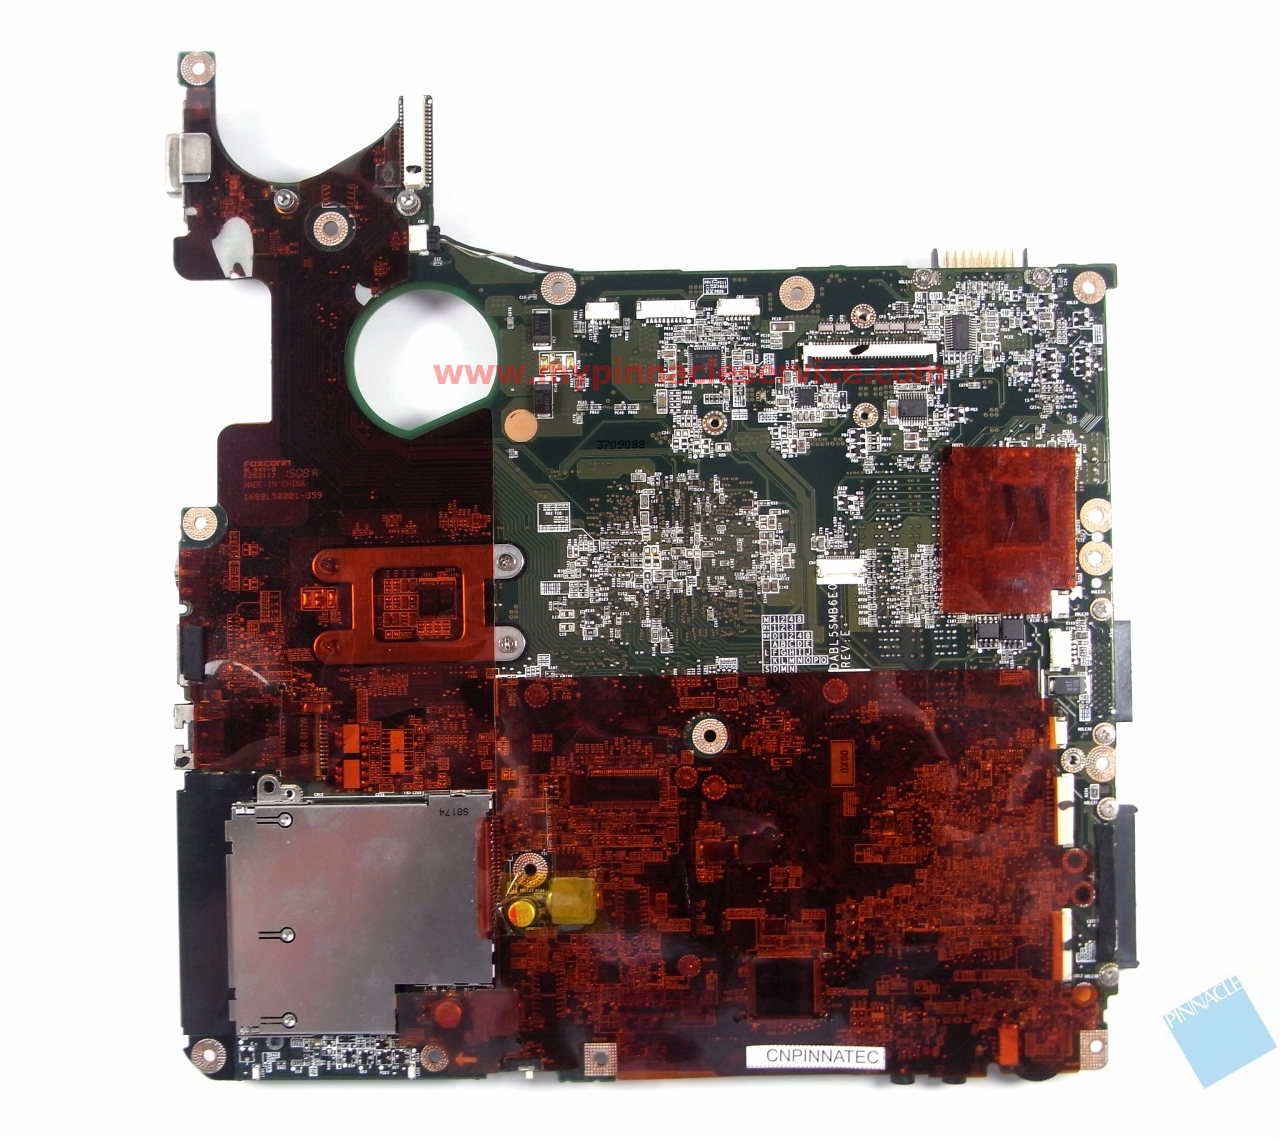 a000030160-motherboard-for-toshiba-satellite-a300-a305-p300-p305-dabl5smb6e0-31bl5mb00d0-rimg0083.jpg